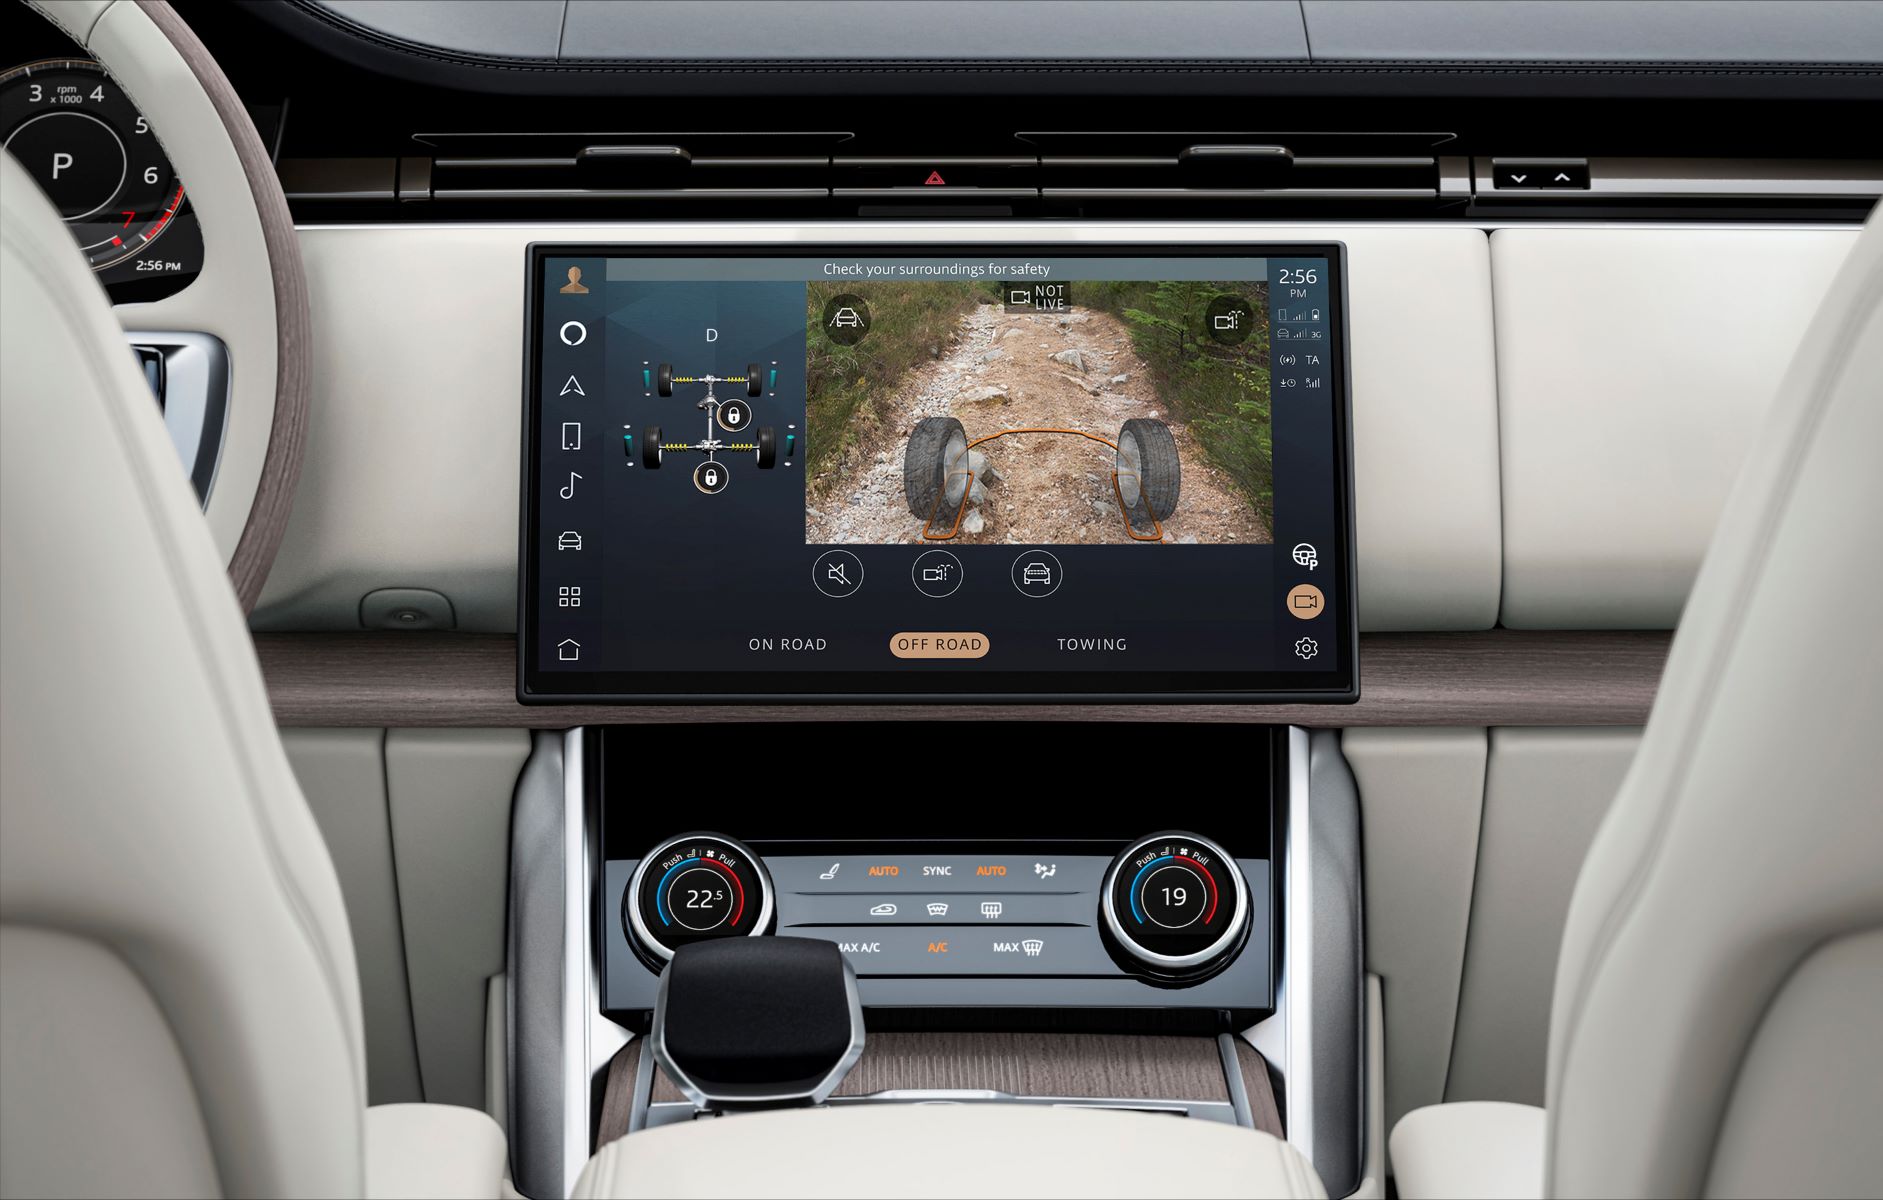 Automotive Luxury: Exploring The Size Of The Floating Touchscreen In The New Range Rover